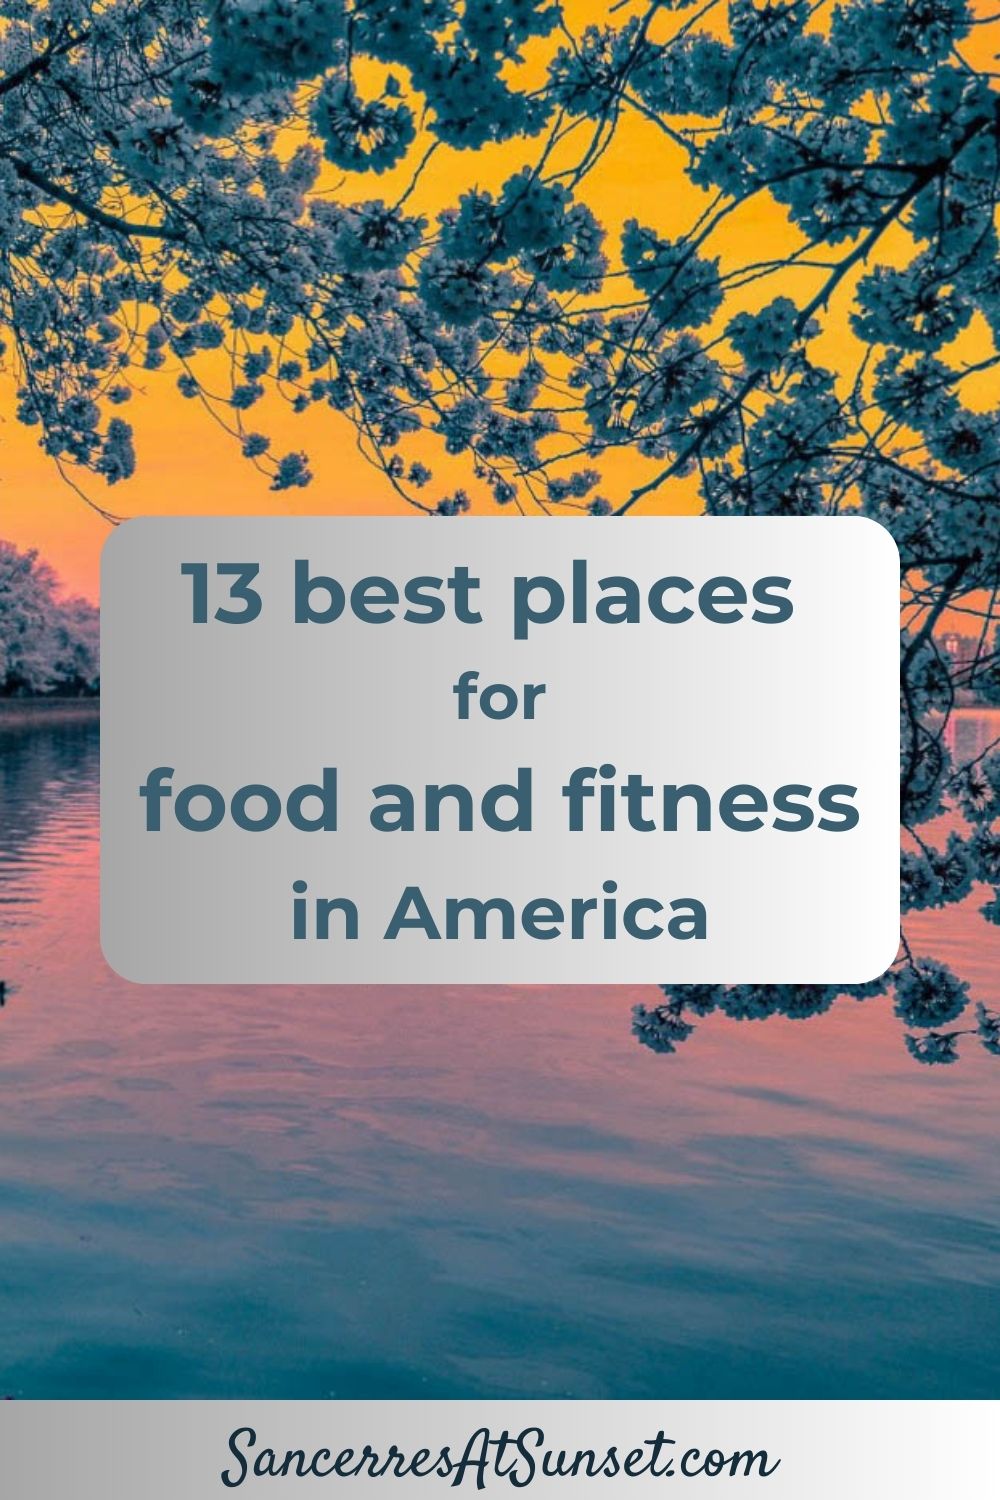 13 Best Places for Food and Fitness in America